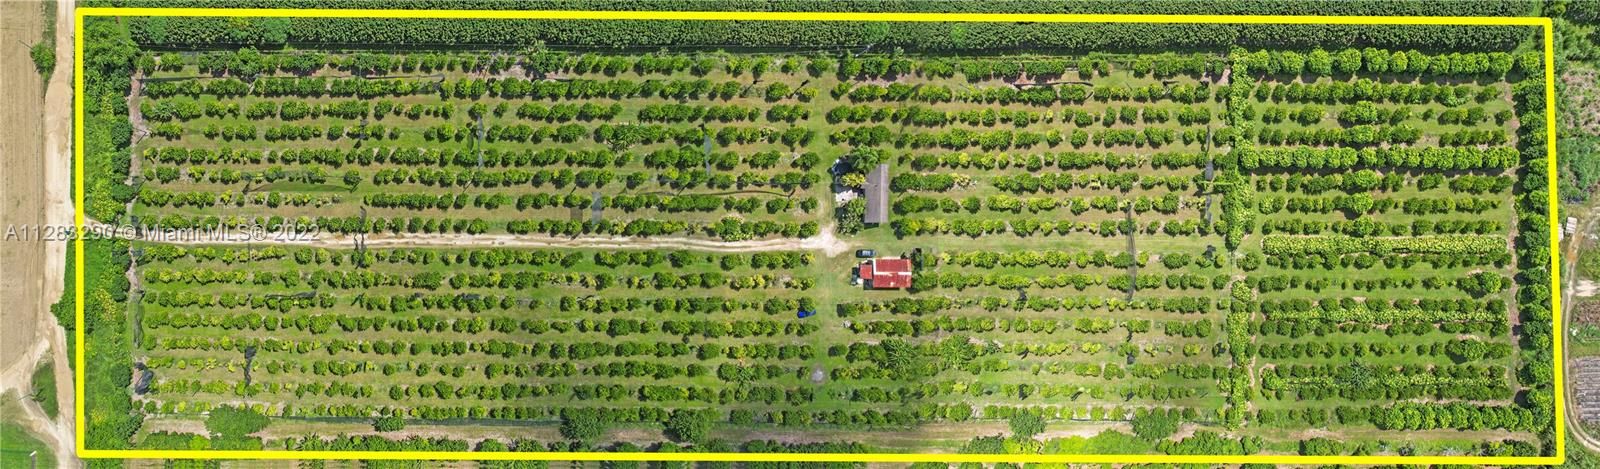 10 ACRE CARAMBOLA GROVE W/ 2/2 FARMHOUSE & PACKING HOUSE, FULLY FENCED AND IRRIGATED